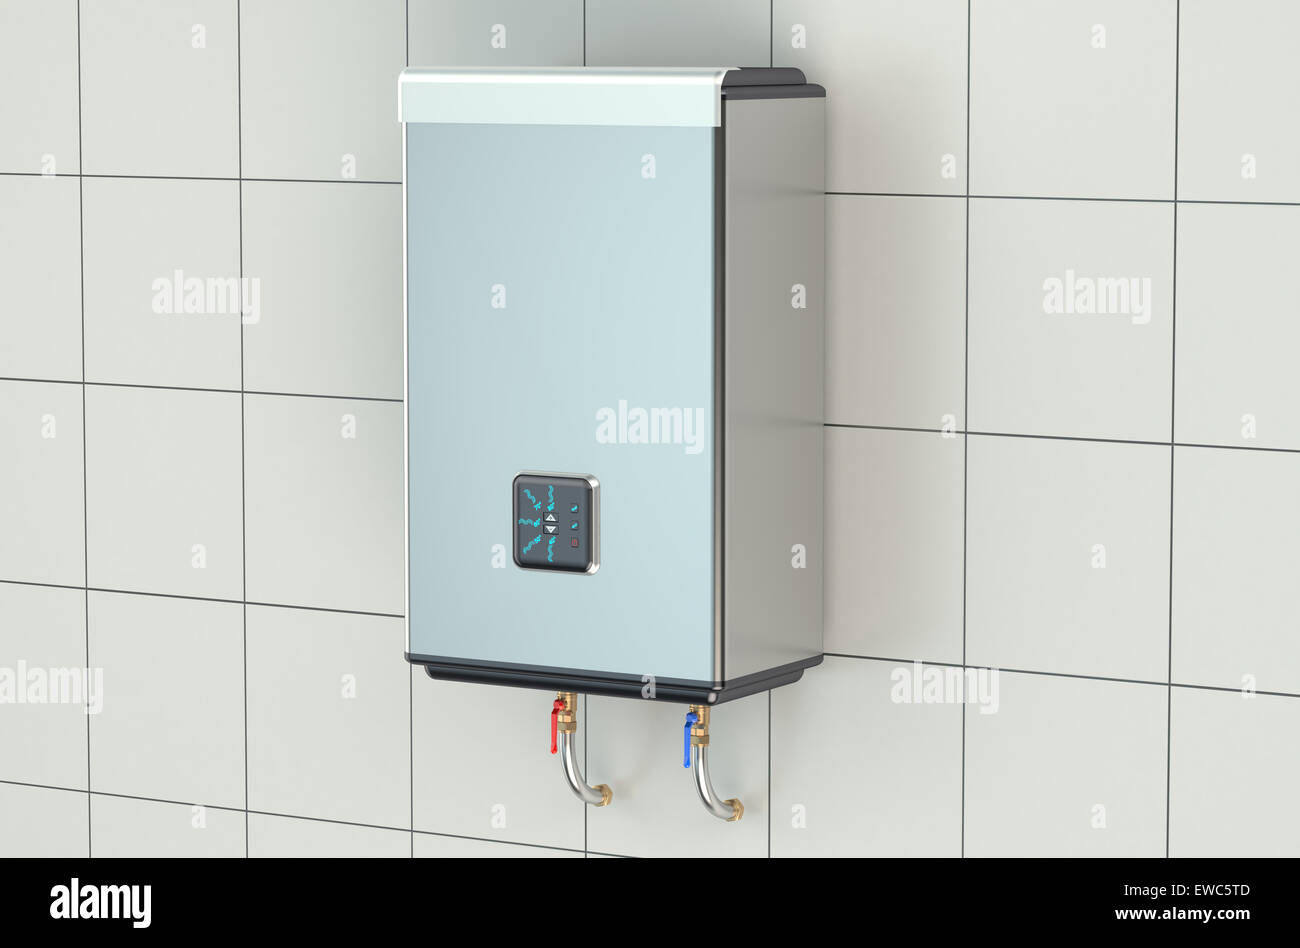 automatic water heater isolated on white background Stock Photo